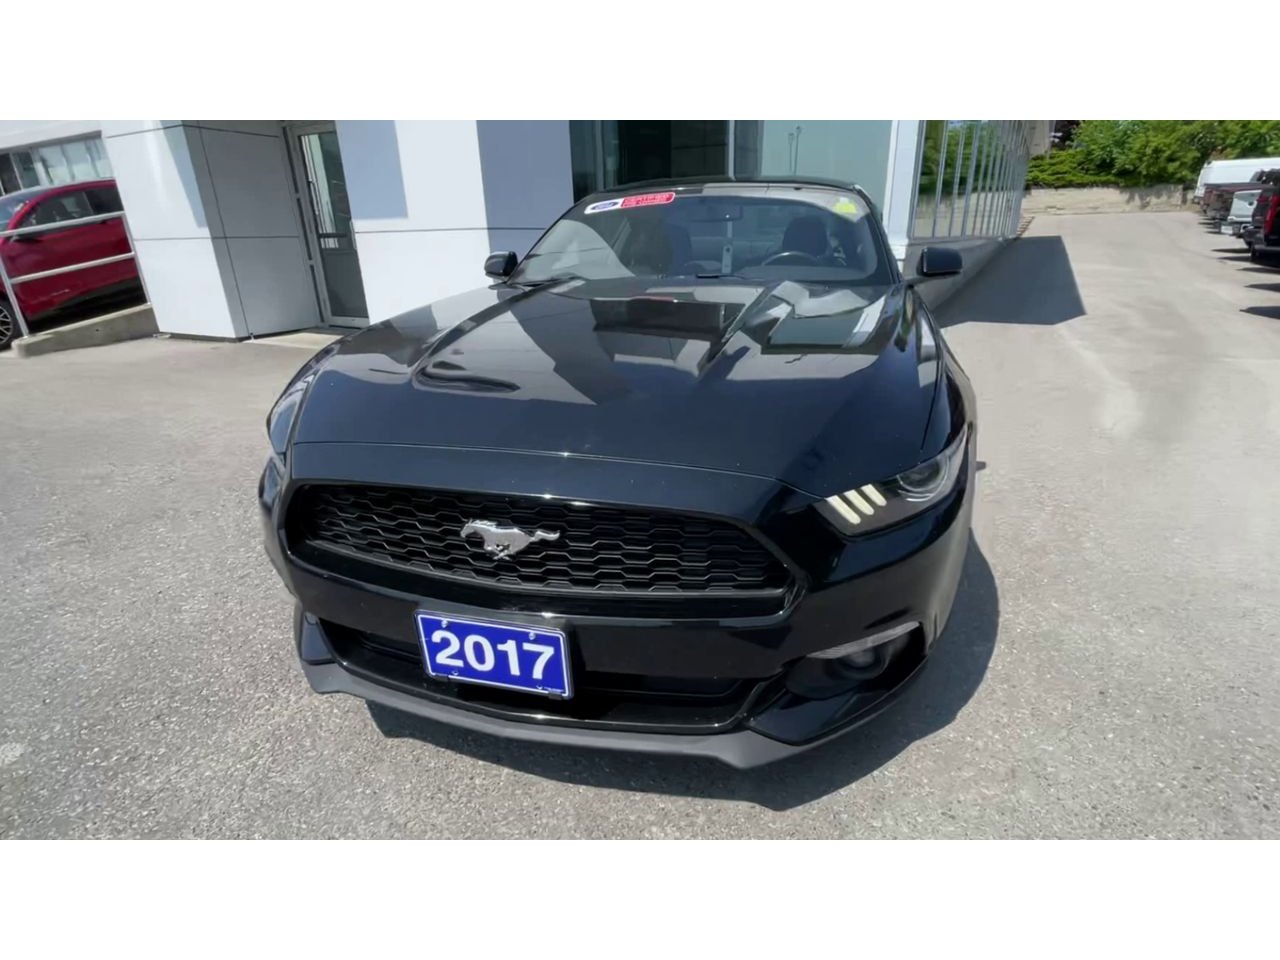 2017 Ford Mustang - 20997A Full Image 3